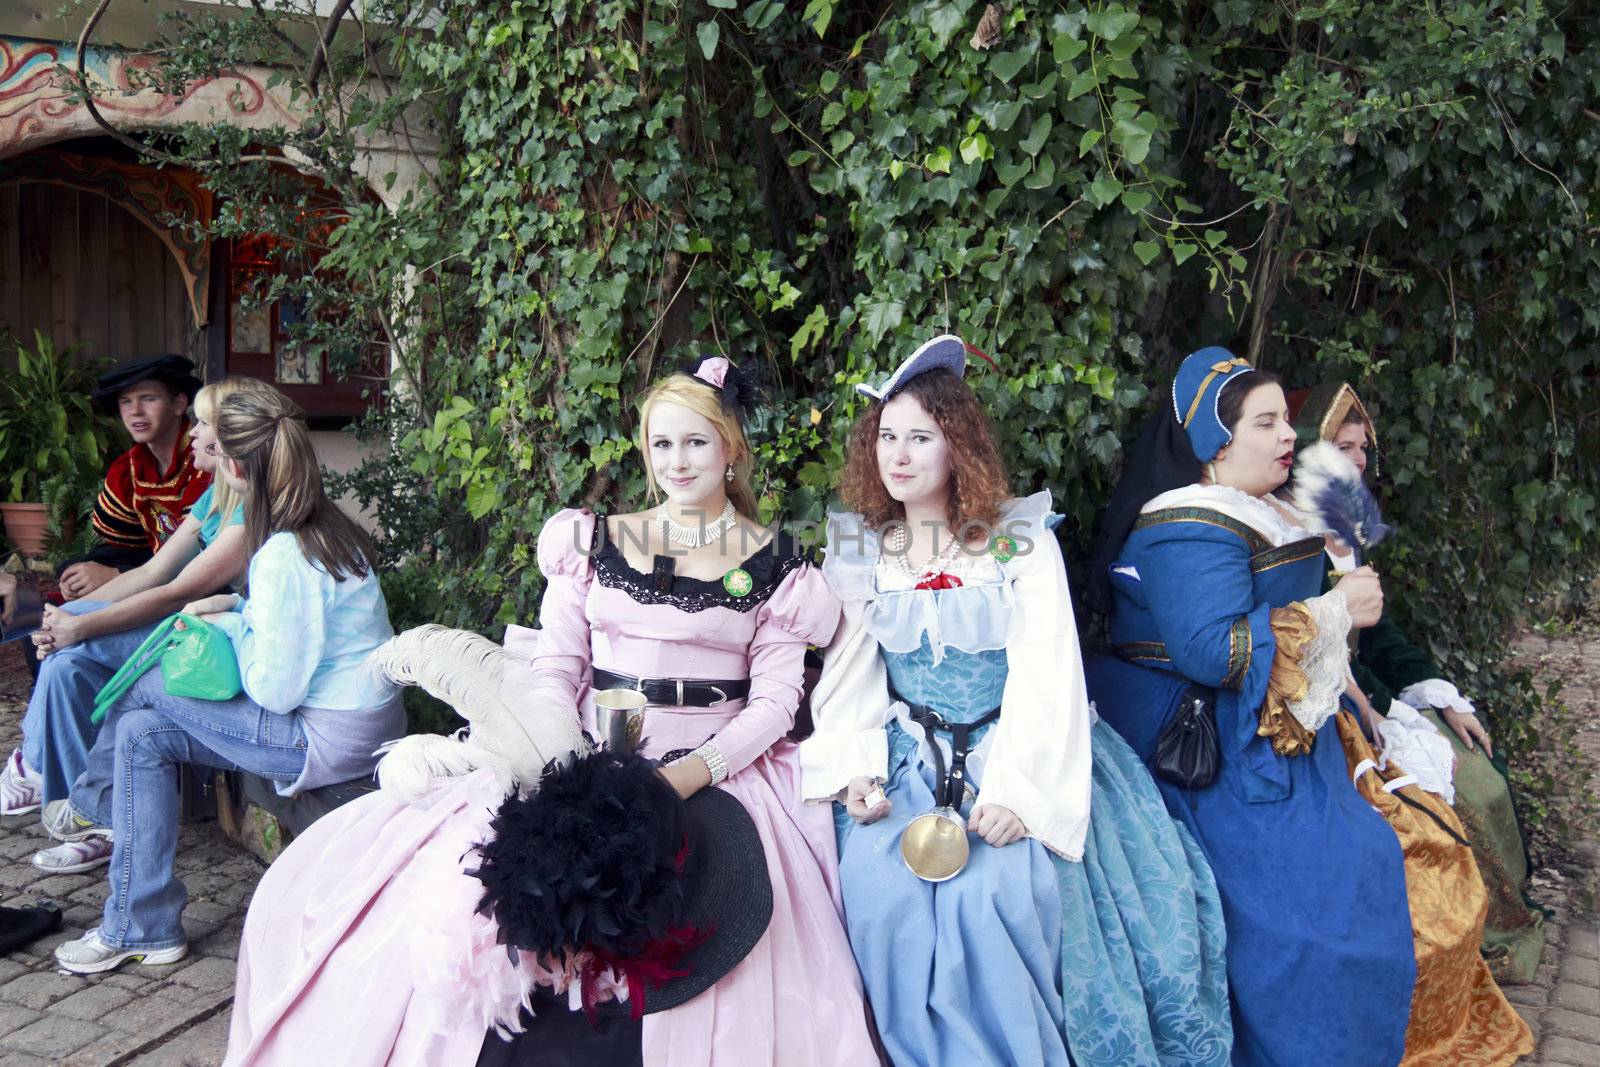 MISSION, TX – OCTOBER 2009: Women performers working at the Texas Renaissance Festival, known as the largest in the state and taken on October 17, 2009 in Mission, Texas.